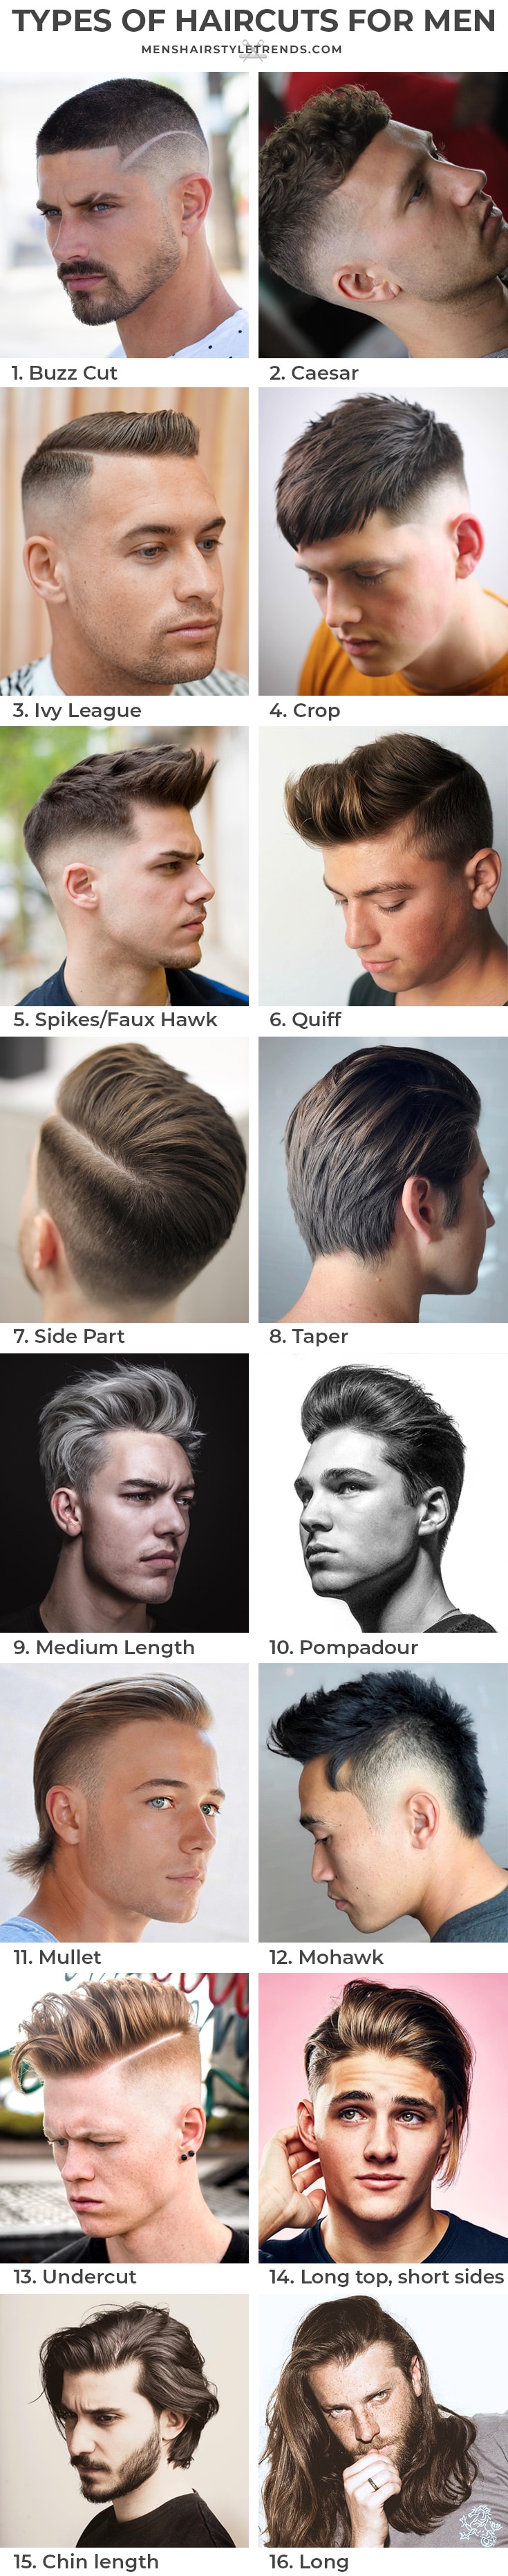 Types of haircuts for men - ultimate guide by Men